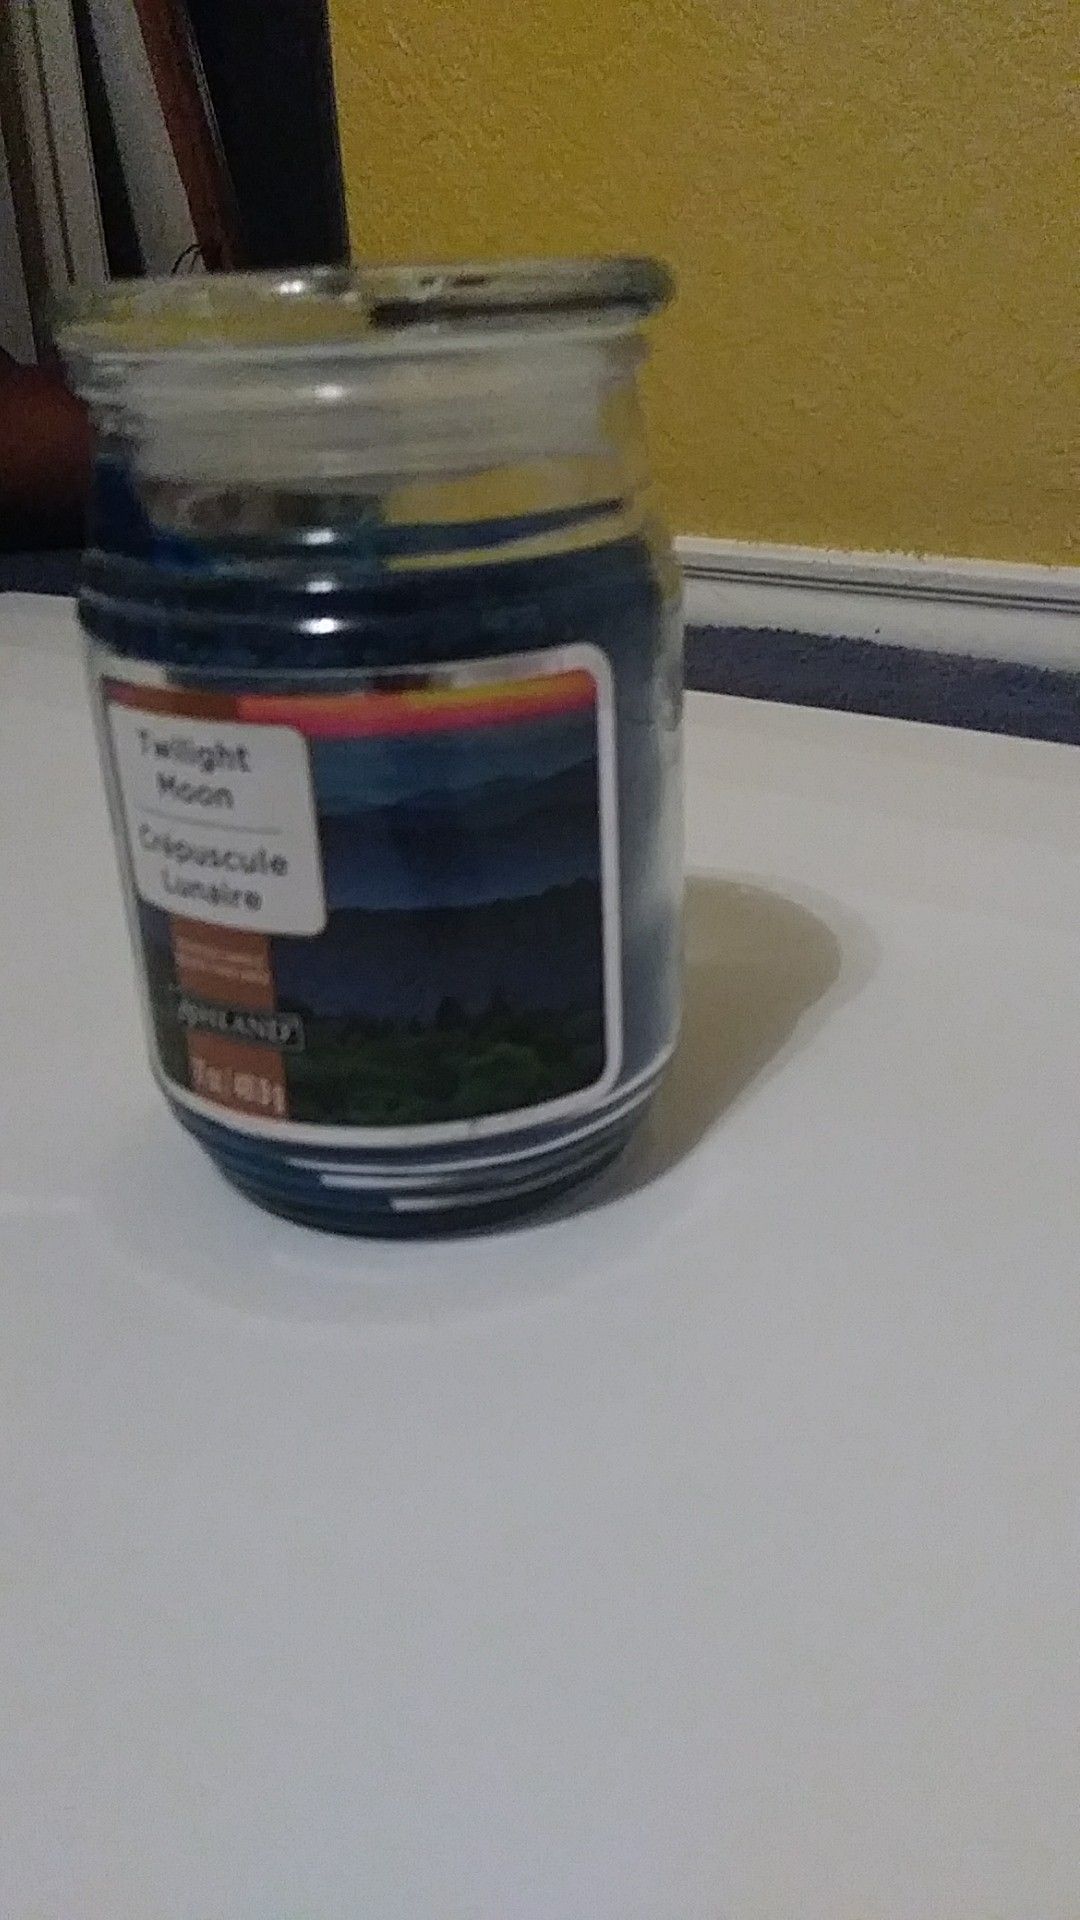 Twilight moon scent candles